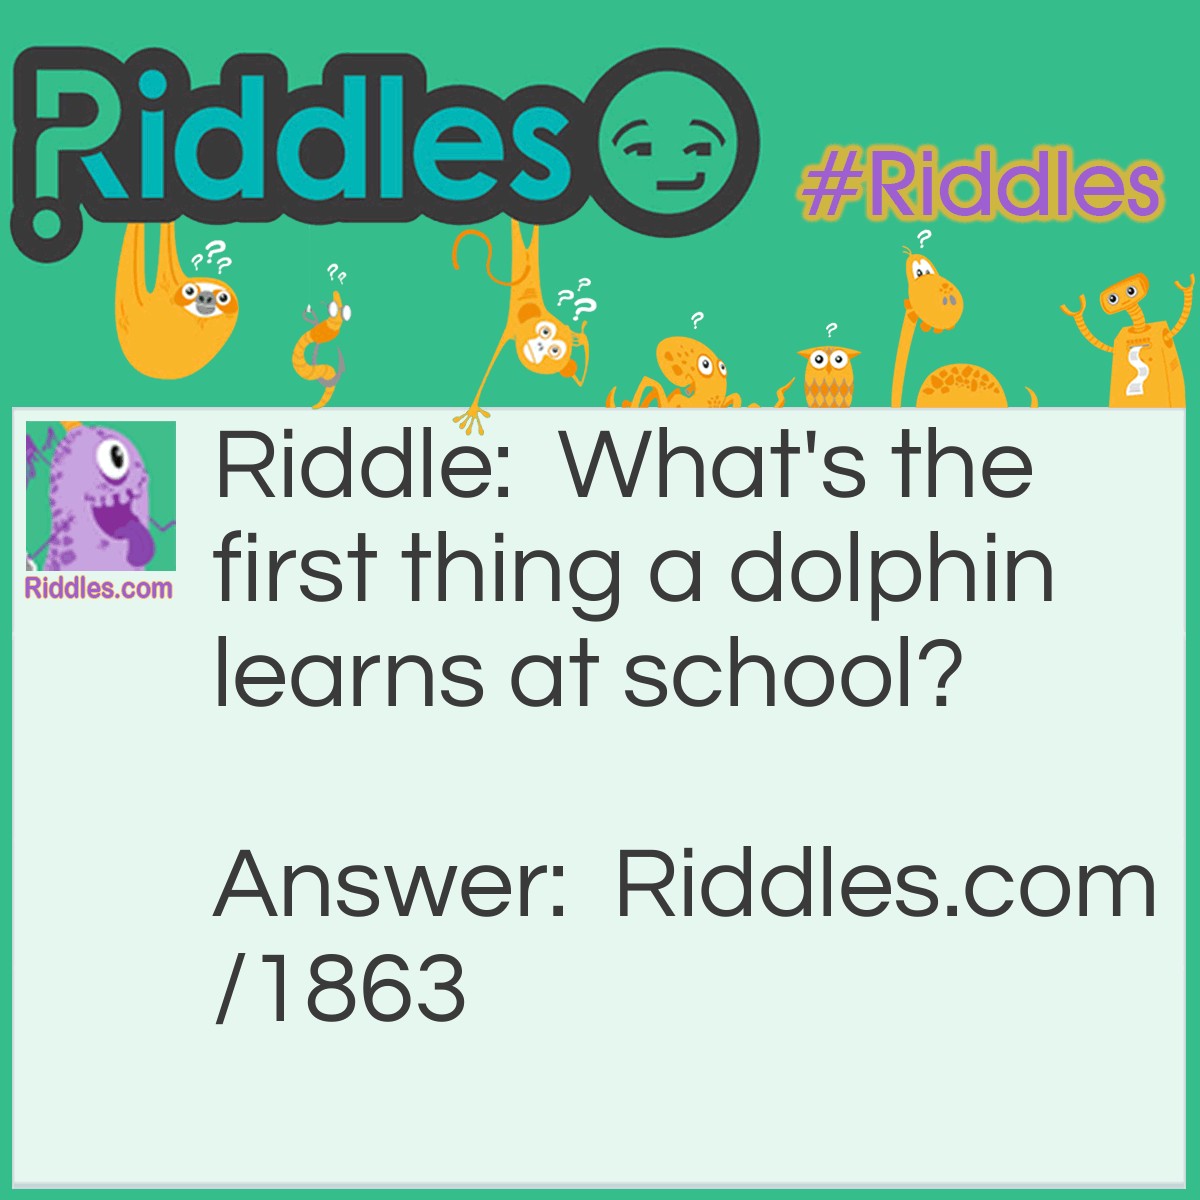 Riddle: What's the first thing a dolphin learns at school? Answer: Her A-B-Seas.